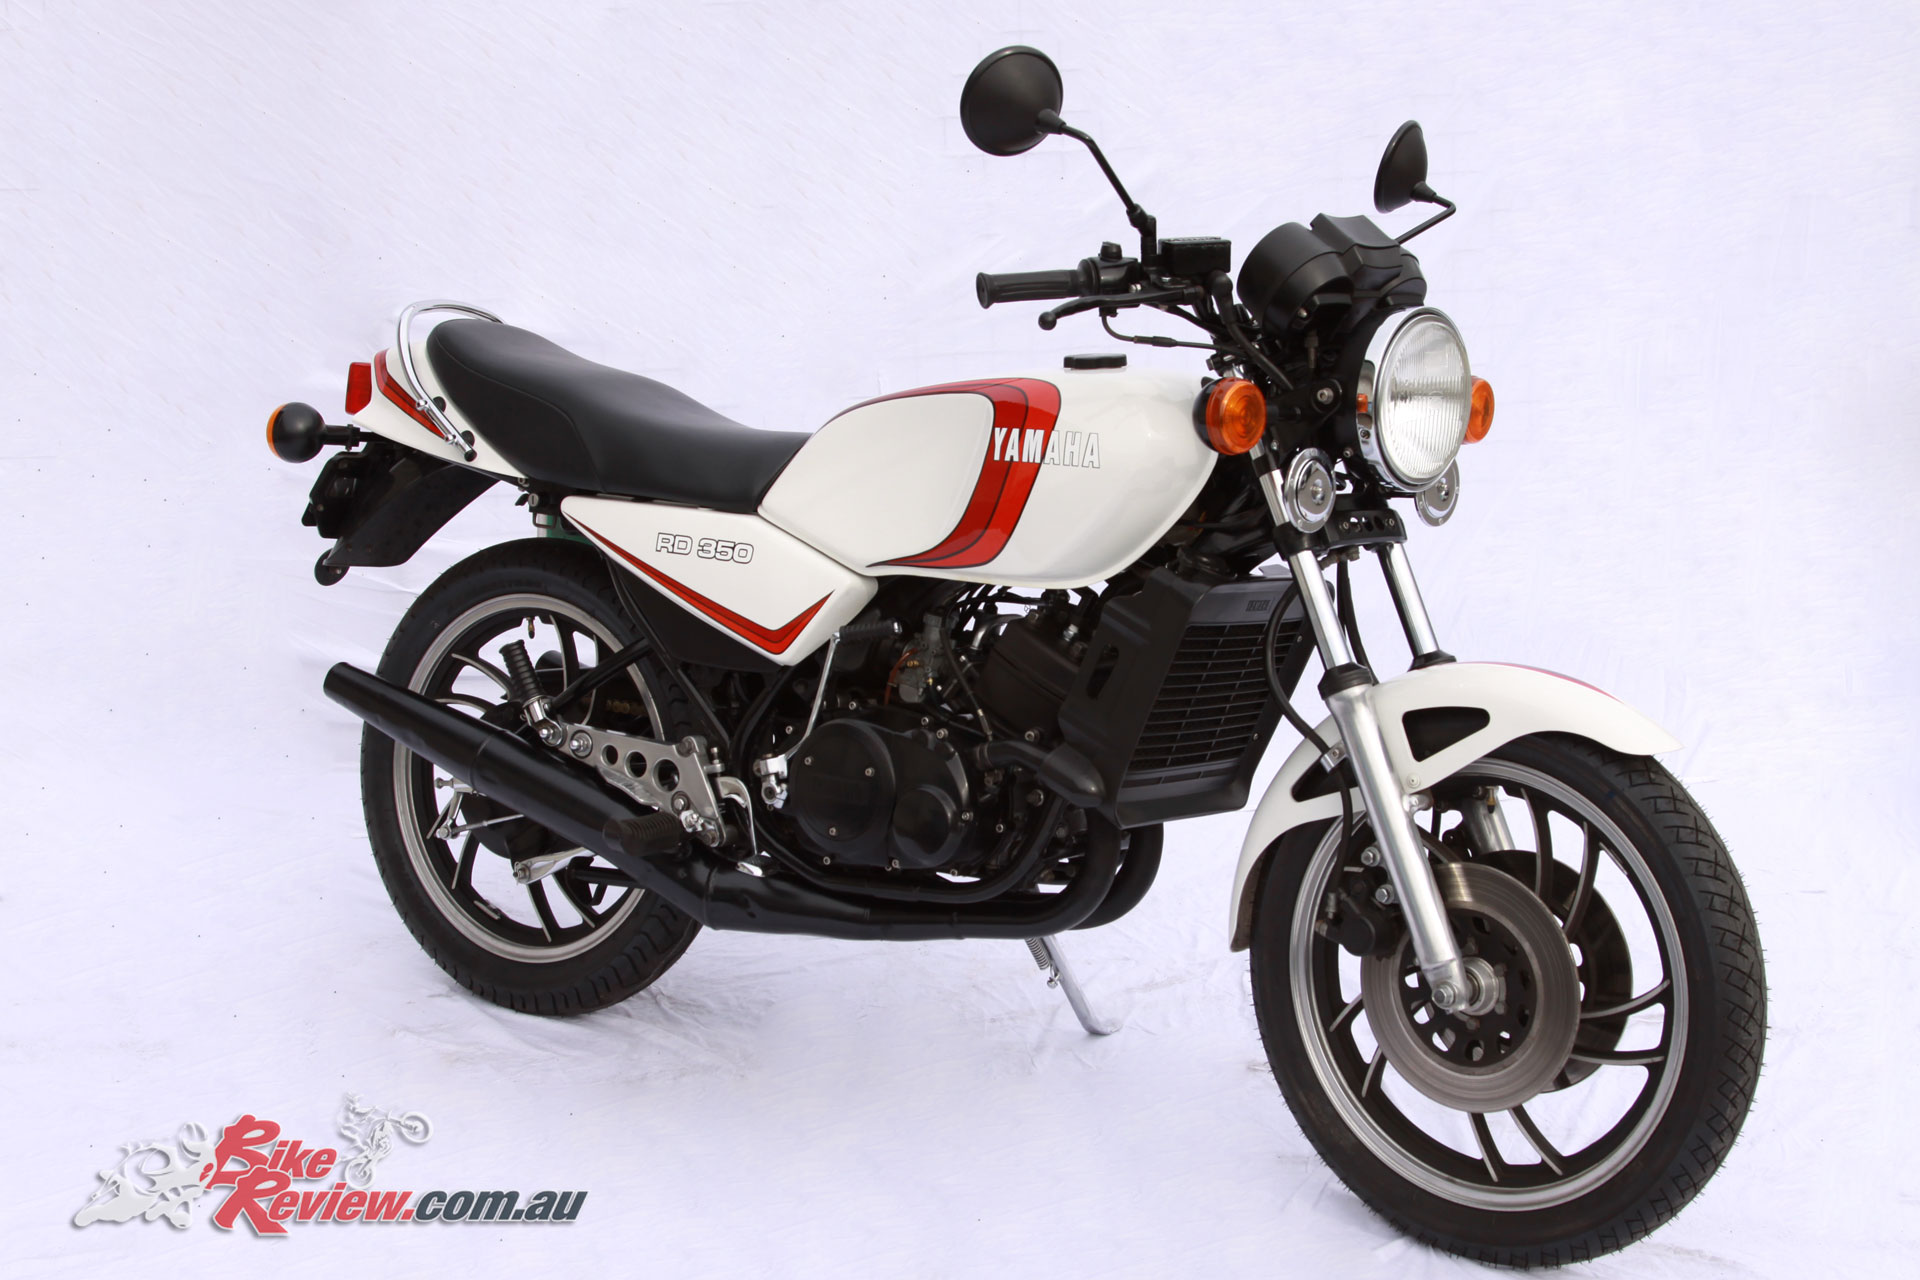 Classic Two Stroke Yamaha S Rd350lc Bike Review